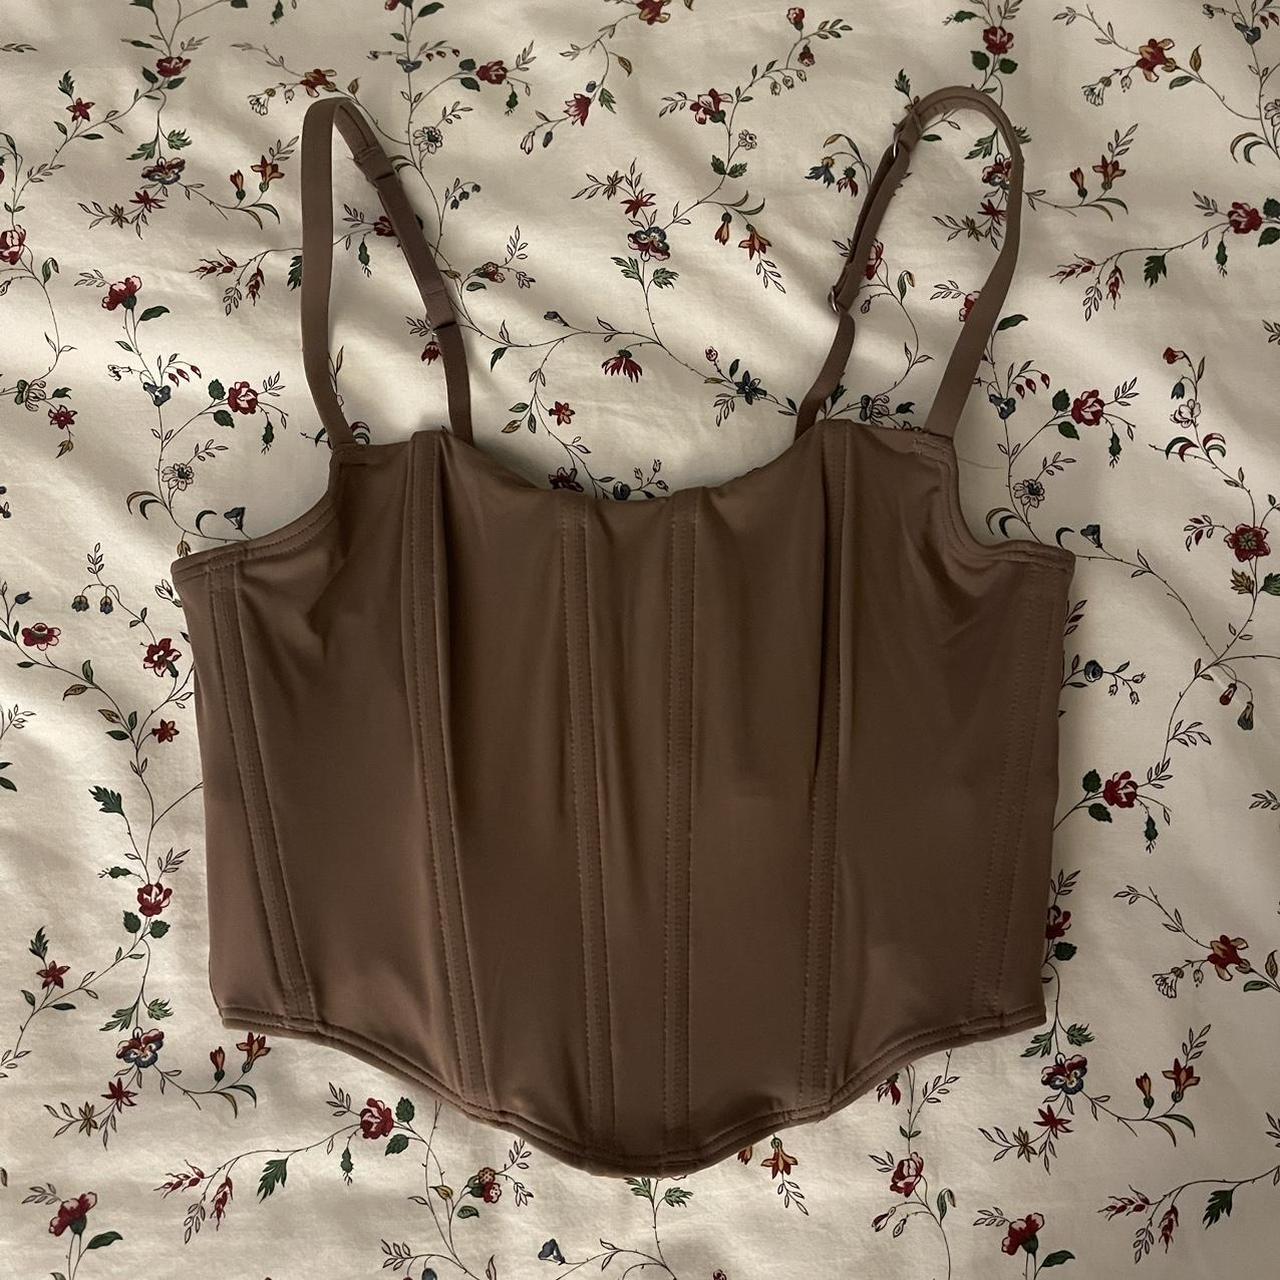 Hollister Corset Top color: brown size: xs selling... - Depop